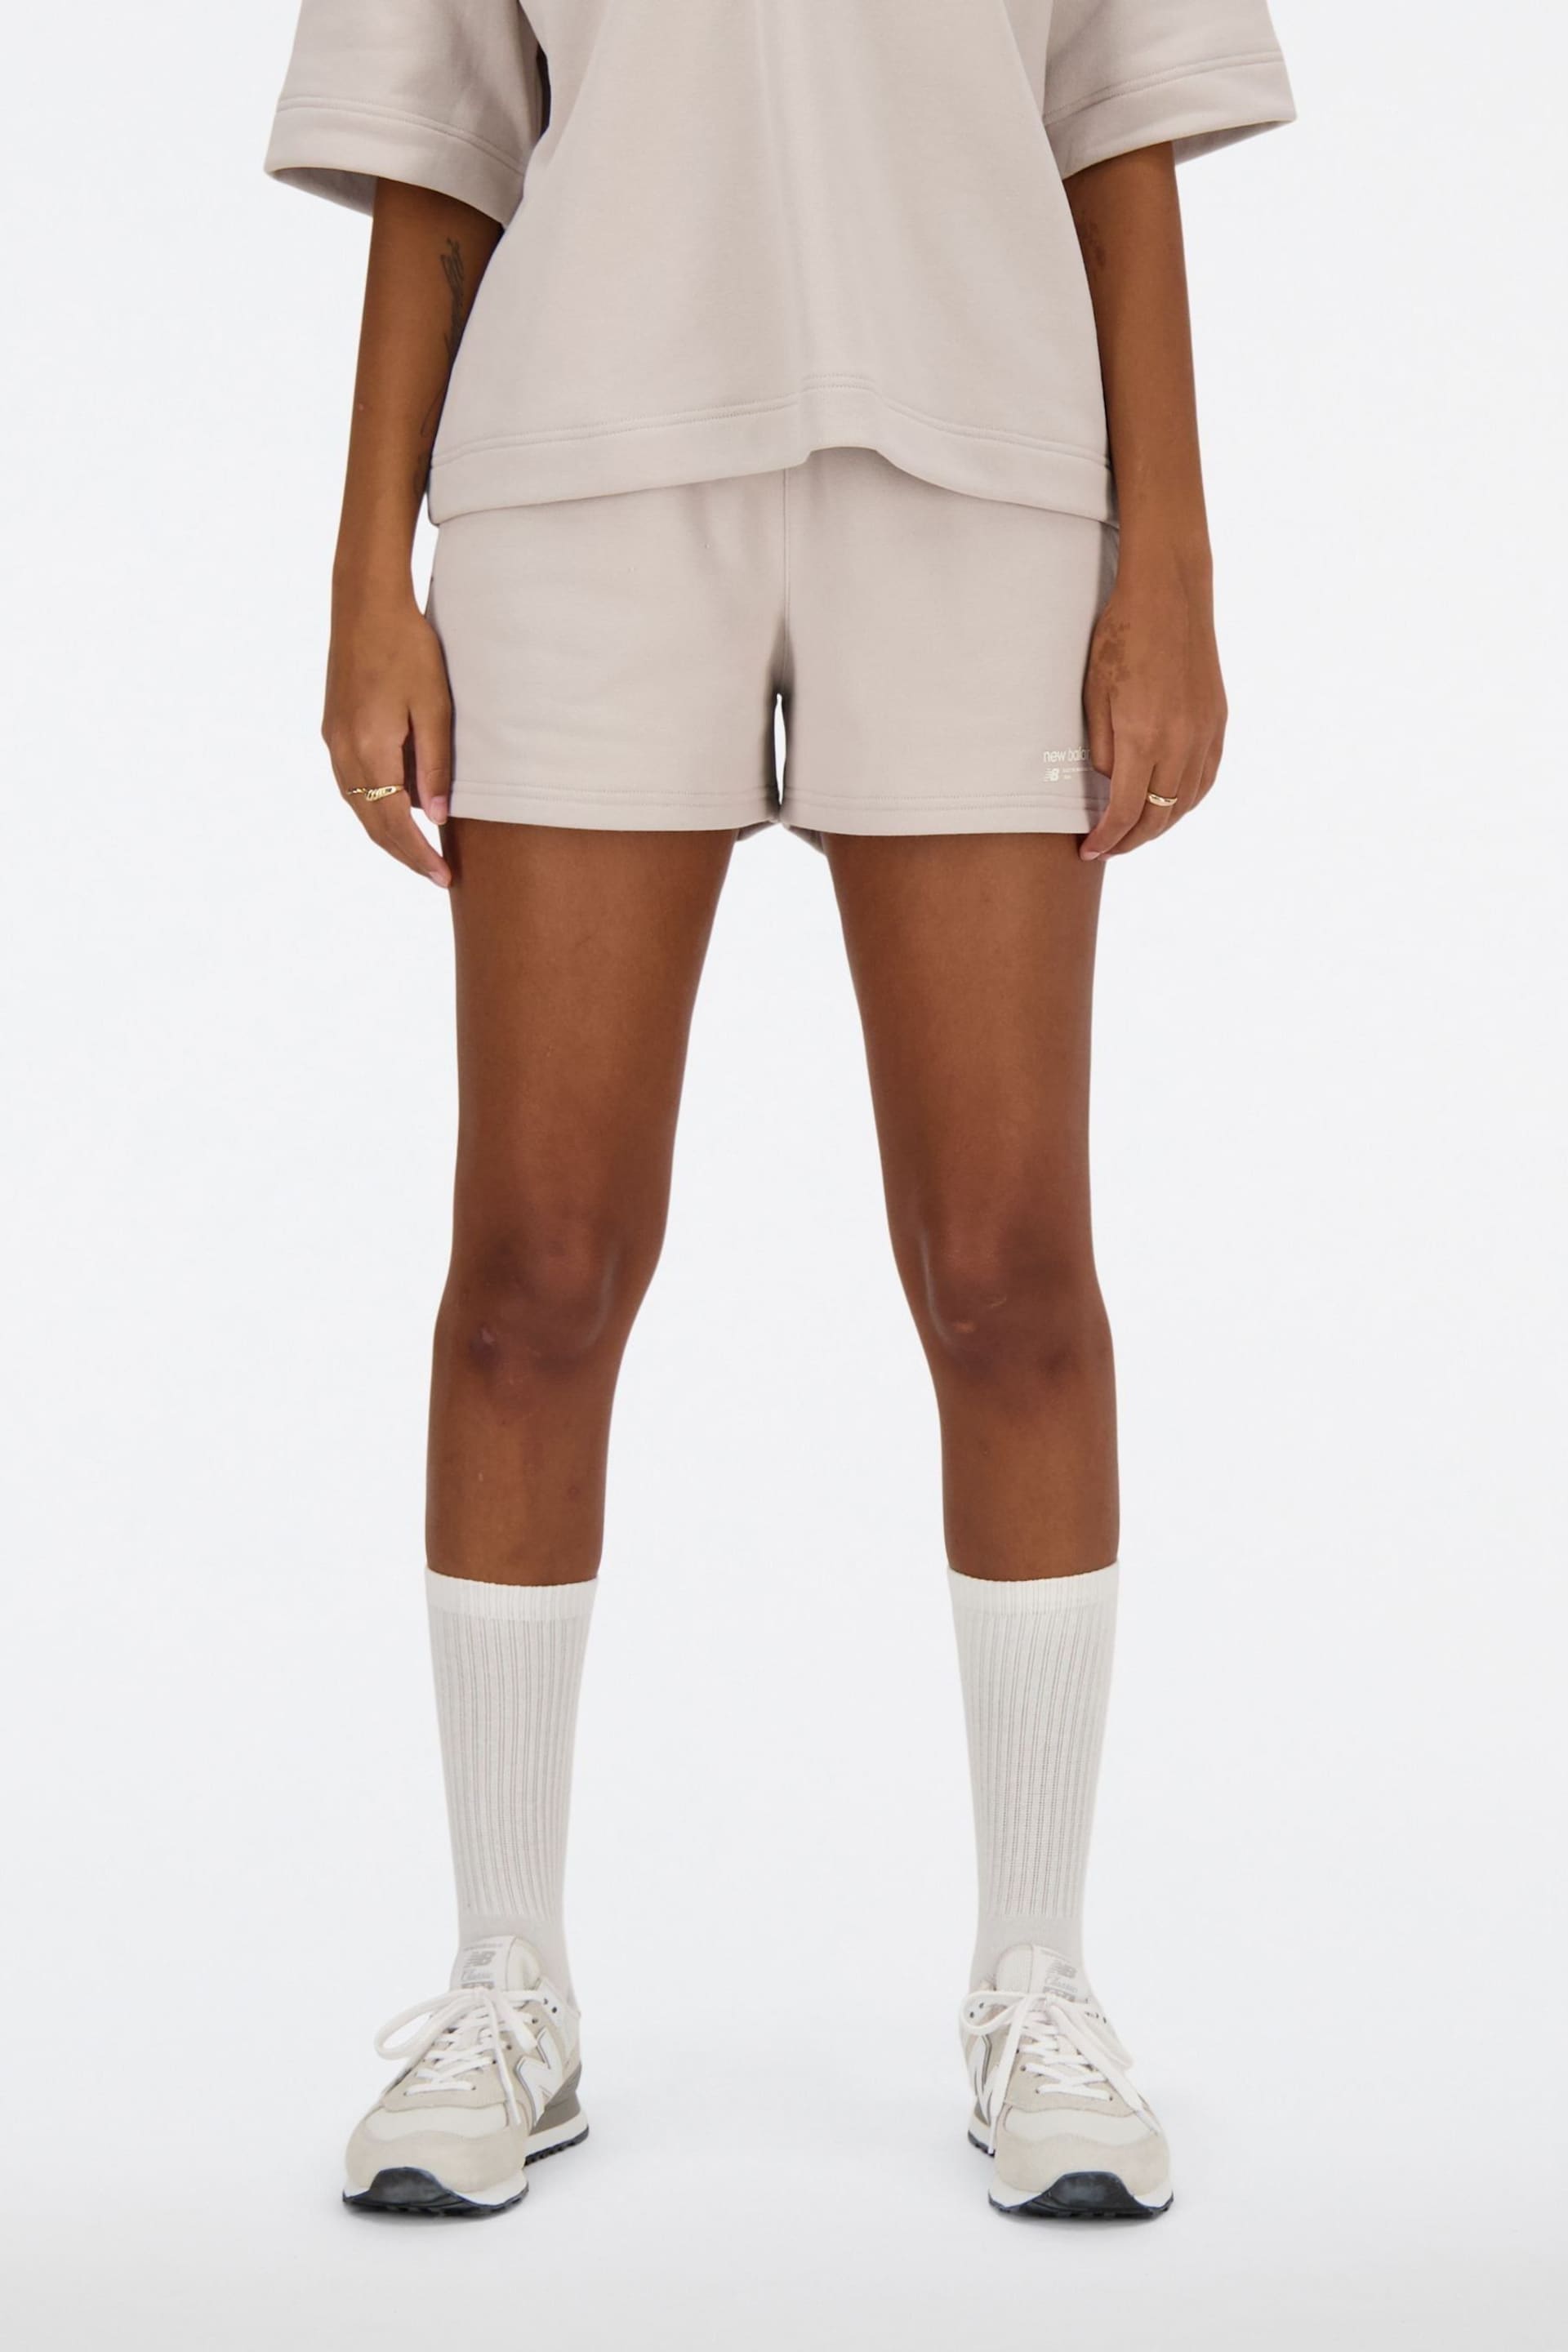 New Balance Grey Linear Heritage French Terry Shorts - Image 1 of 6